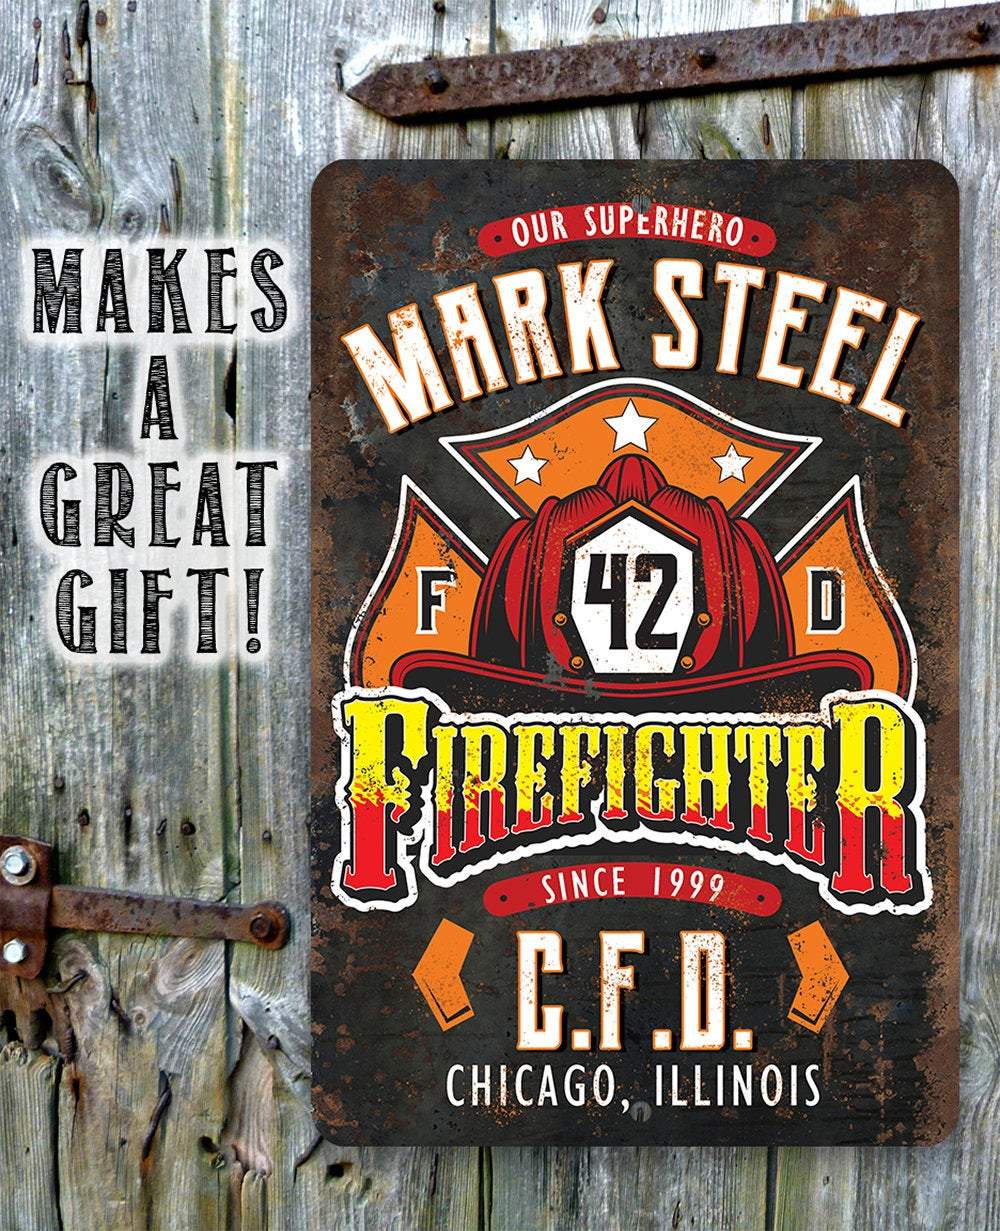 Personalized - Firefighter - Metal Sign | Lone Star Art.